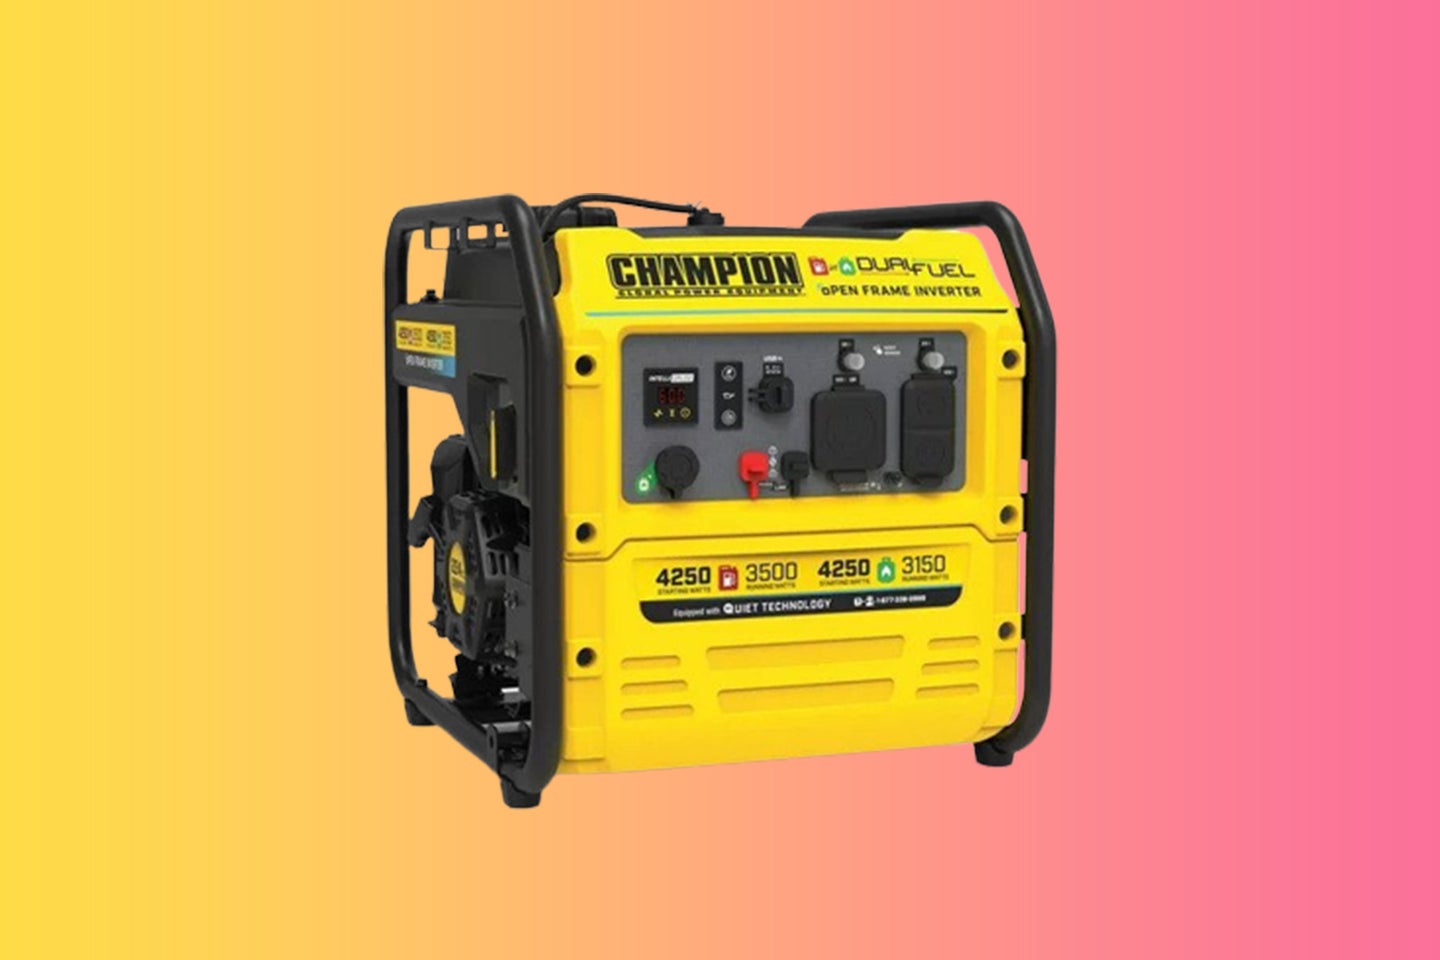 A yellow generator against a pink and yellow background